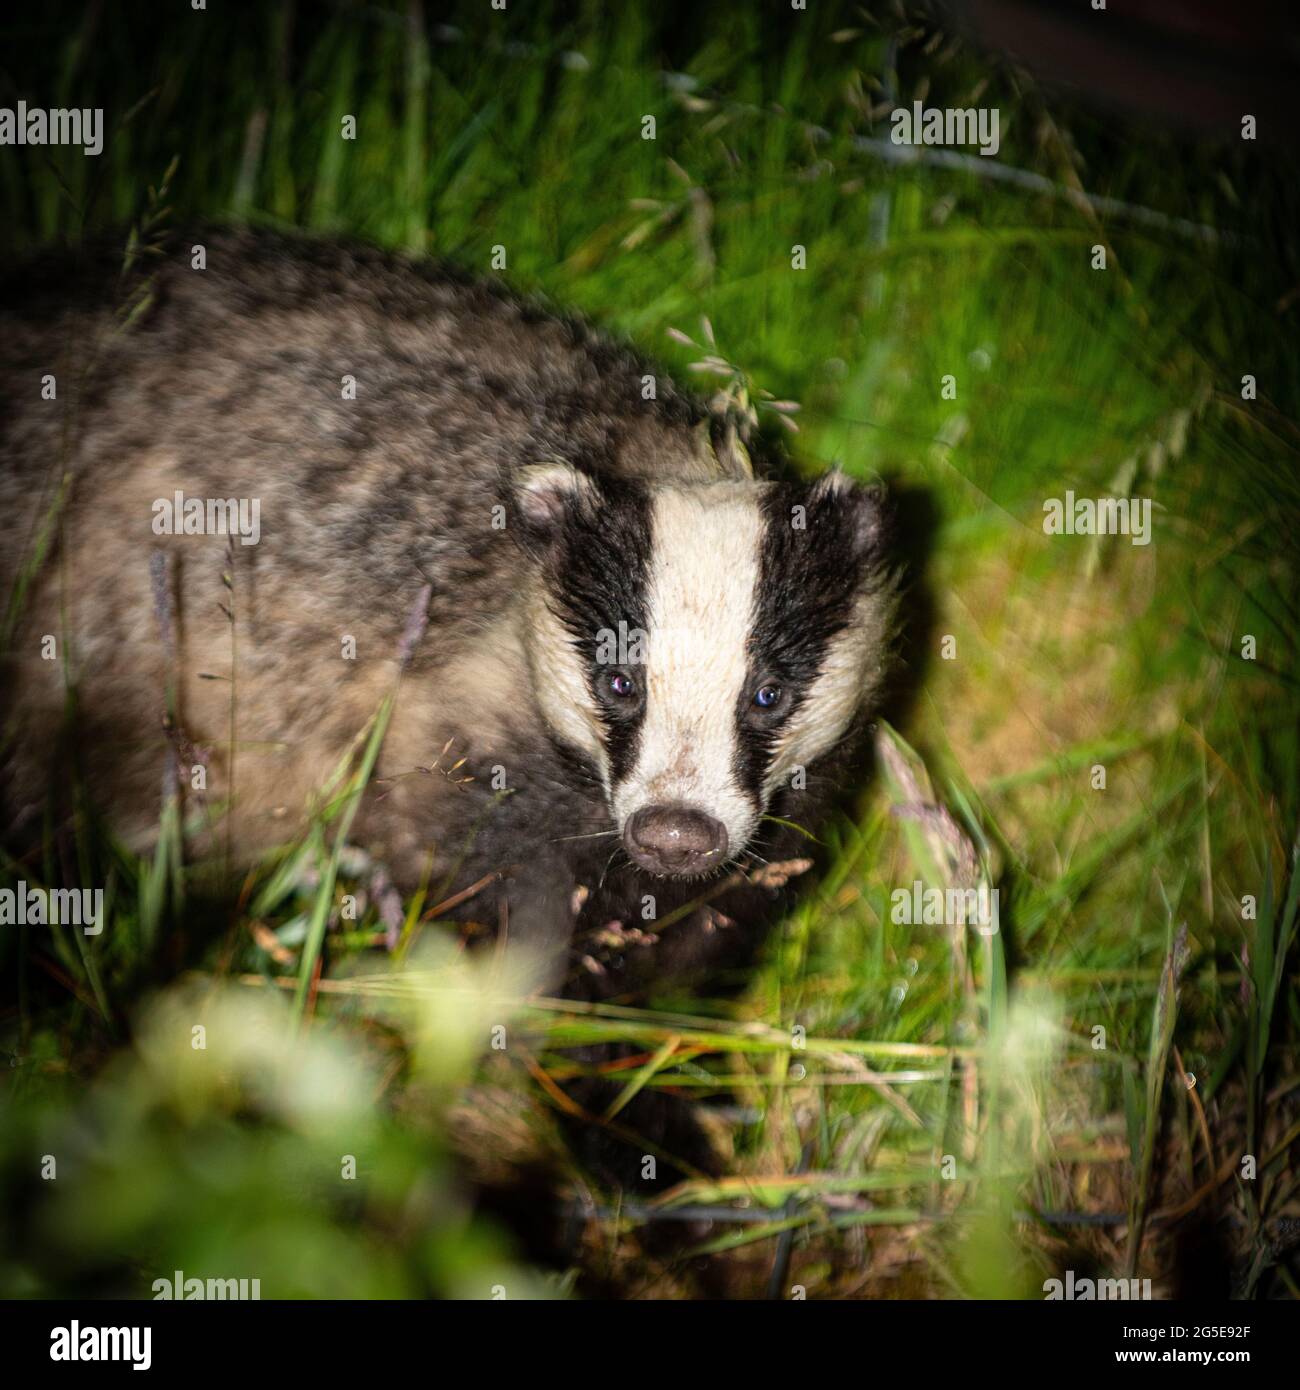 One of our nocturnal visitors this week.  This badger was totally unfussed about my being there, I had to resort to a shorter focal length to make the Stock Photo